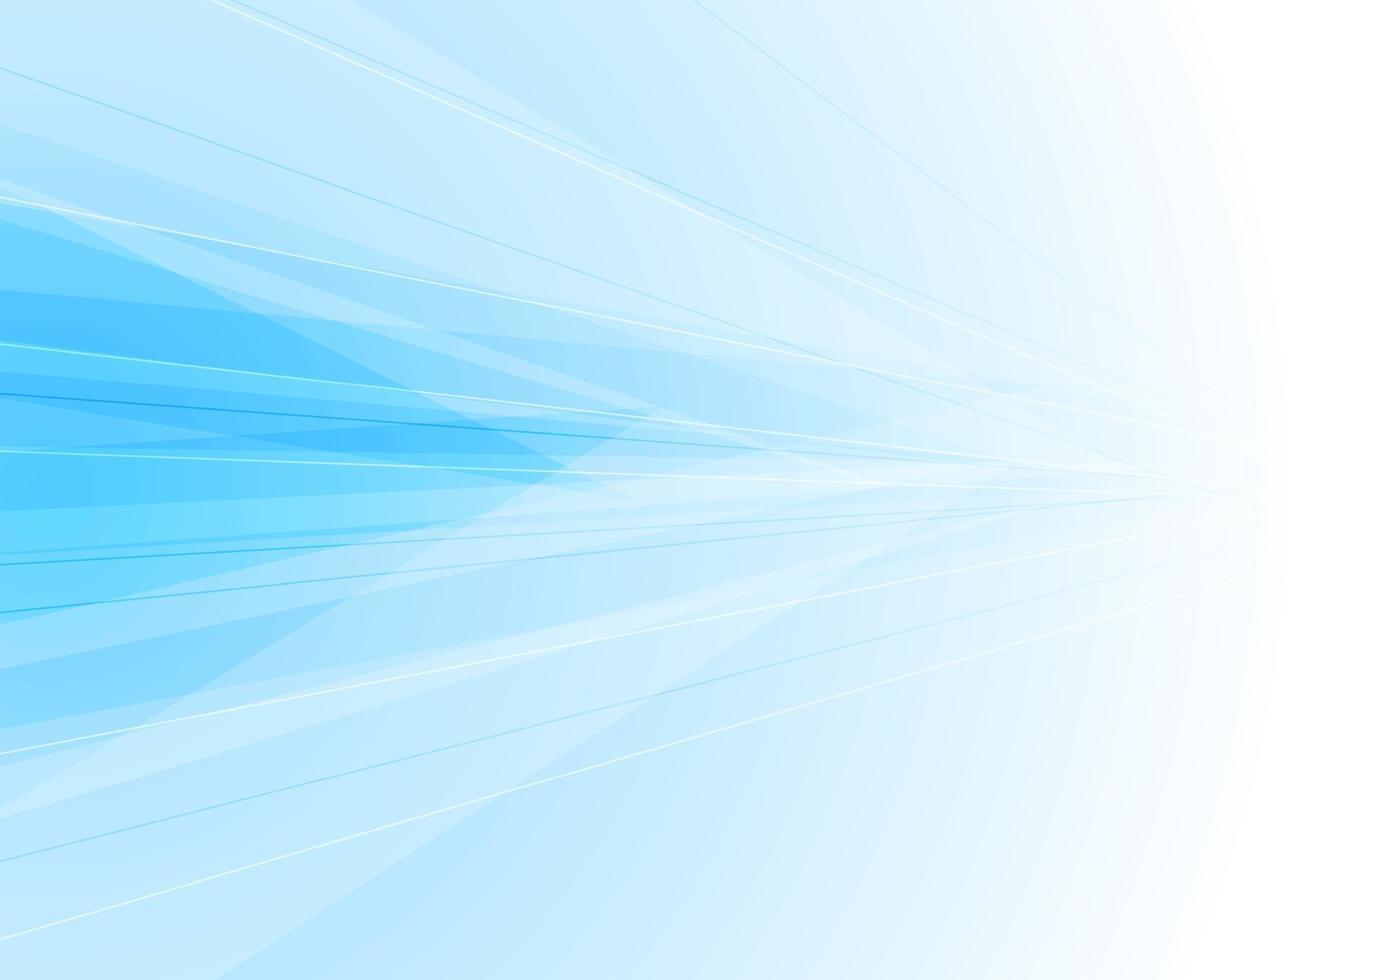 Abstract shiny light blue lines and stripes background vector